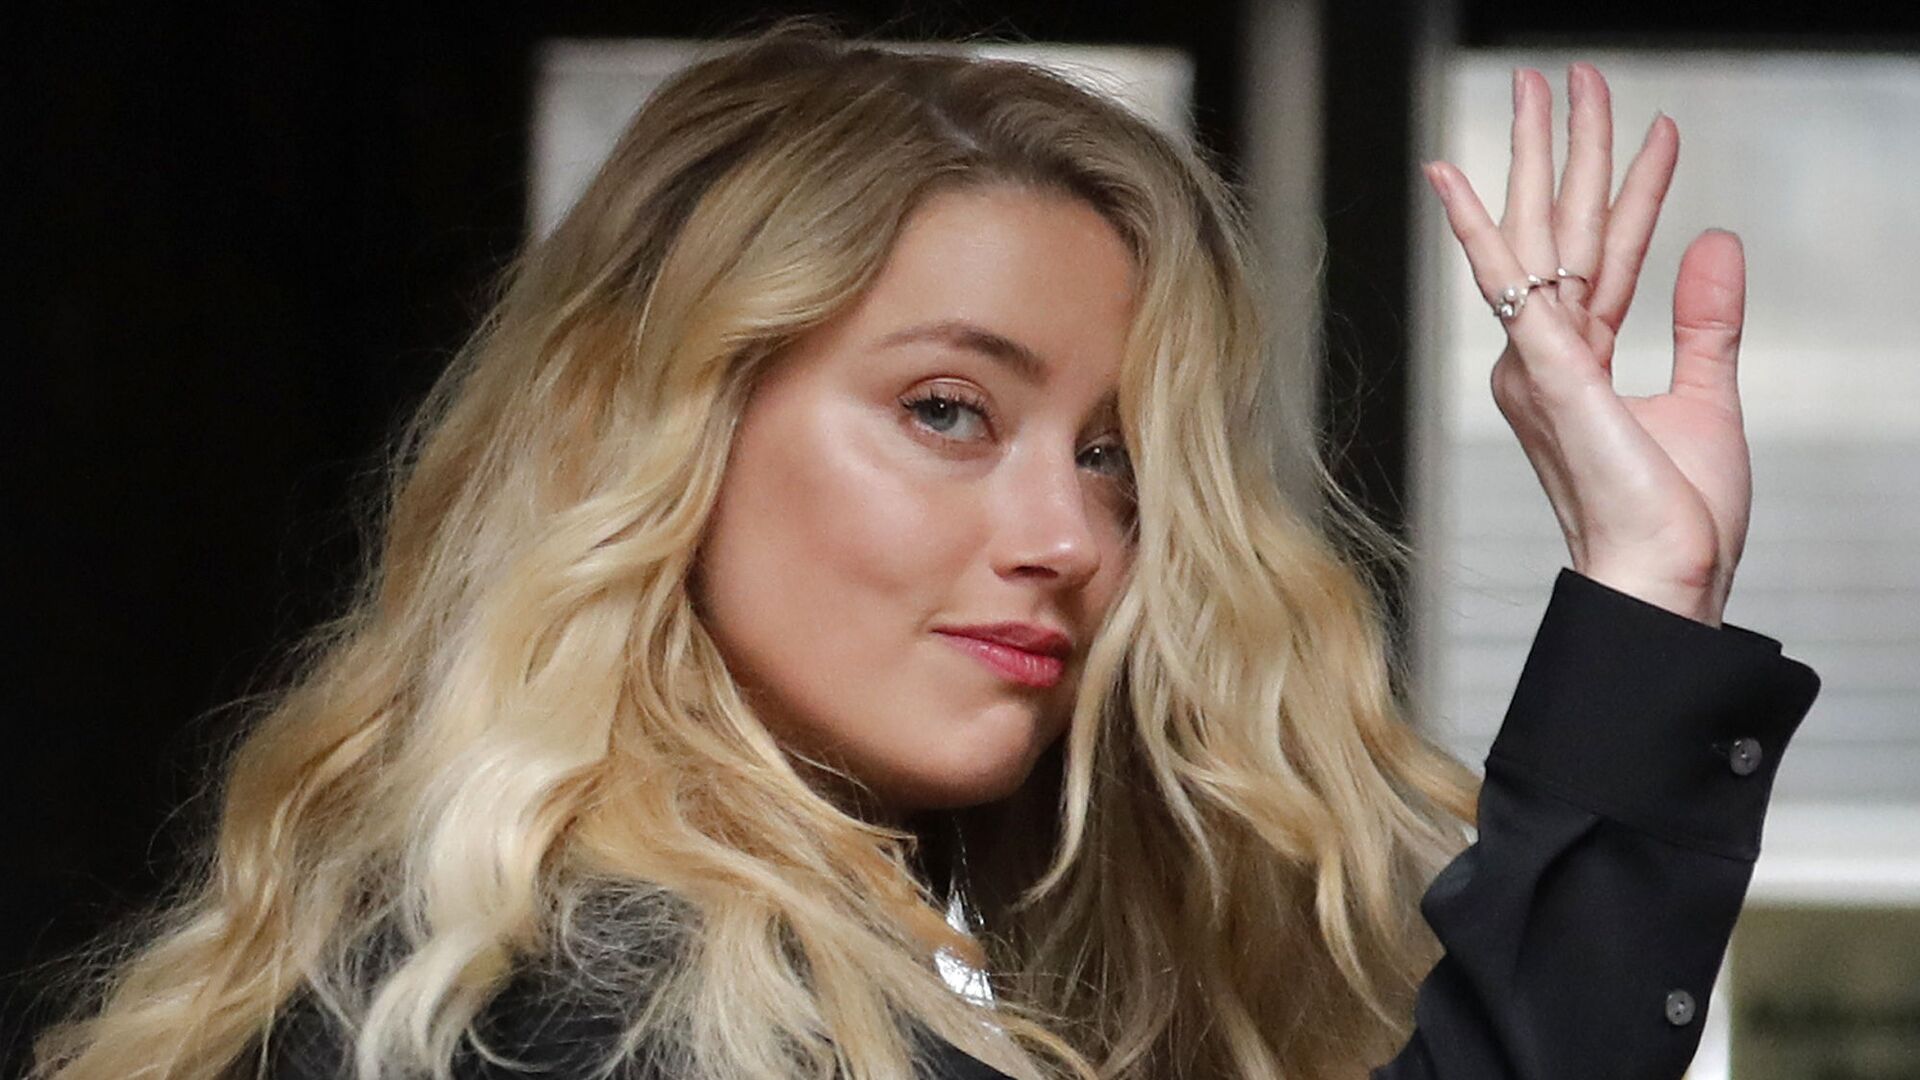 US Actress Amber Heard, former wife of actor Johnny Depp, arrives at the High Court in London, Tuesday, July 28, 2020.  - Sputnik International, 1920, 23.04.2022